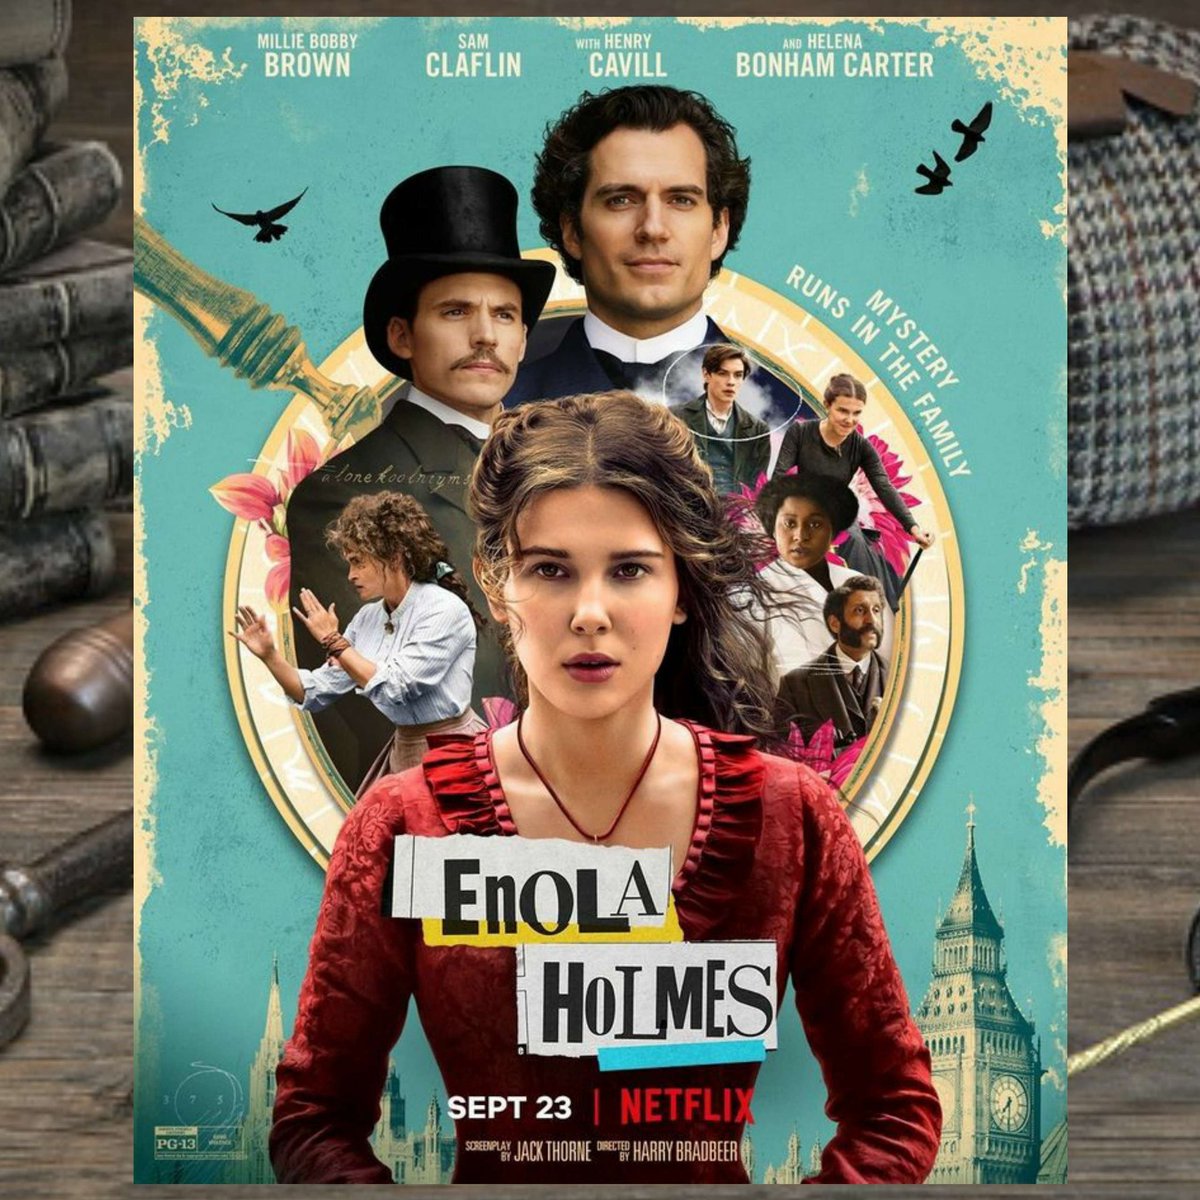 Streaming Life: 3:39am... just finished watching Enola Holmes 2 on Netflix with the Mrs. It was fantastic and better than the first, and the first fantastic itself! 
#netflix #enolaholmes #enolaholmes2 #sherlockholmes #milliebobbybrown #henrycavill #helenabonhamcarter